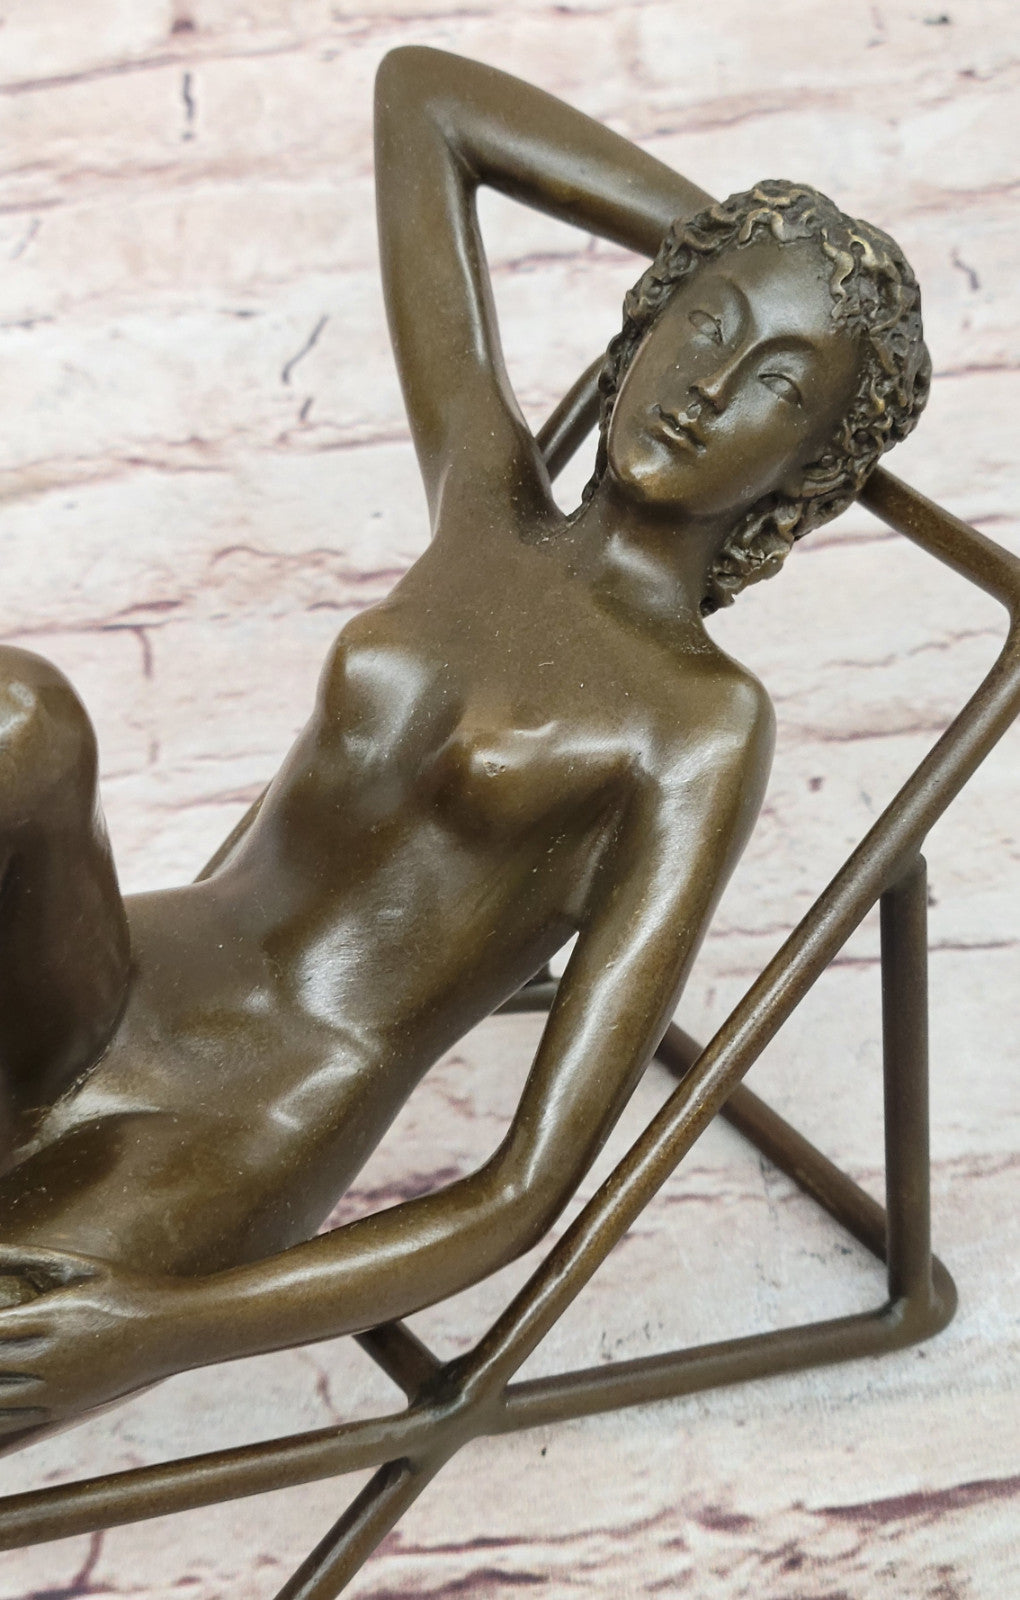 Lost Wax Method Sculpture: Nude Woman Relaxing on Beach Chair